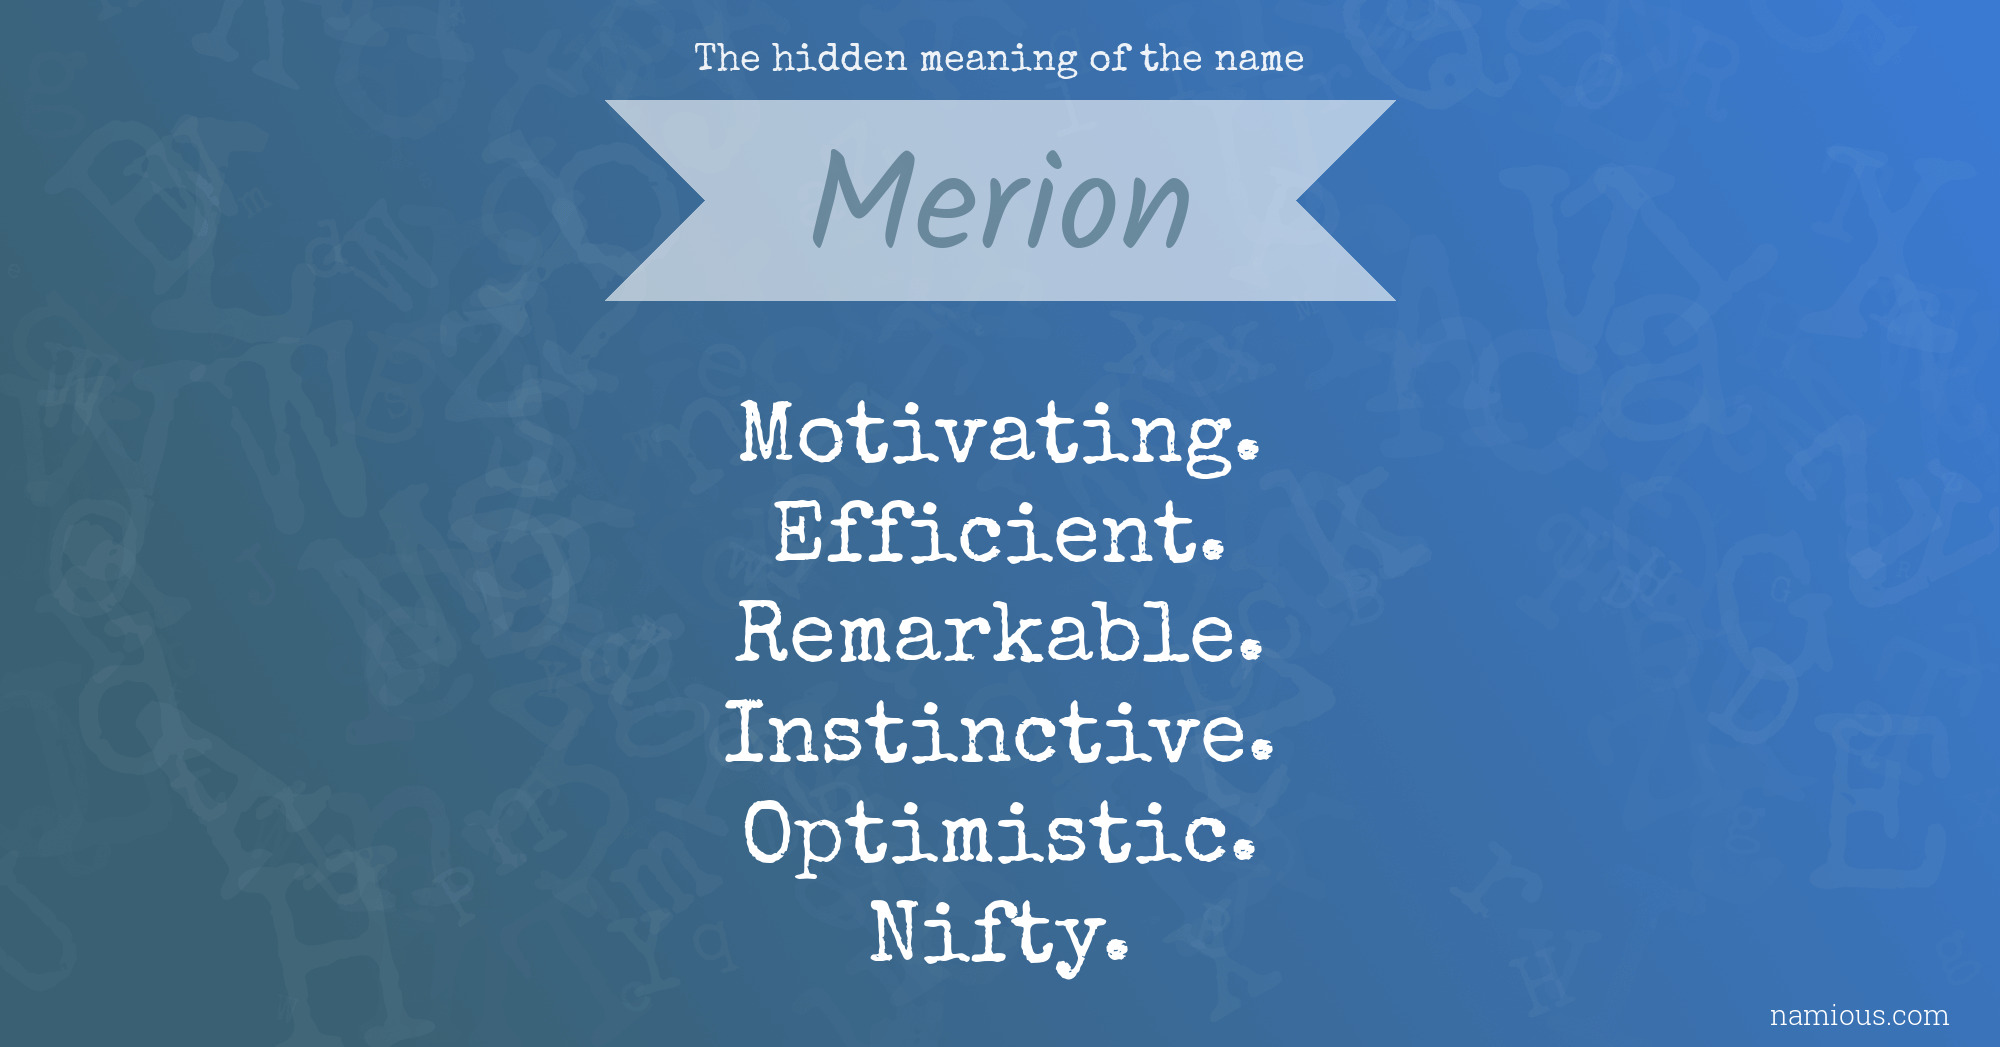 The hidden meaning of the name Merion